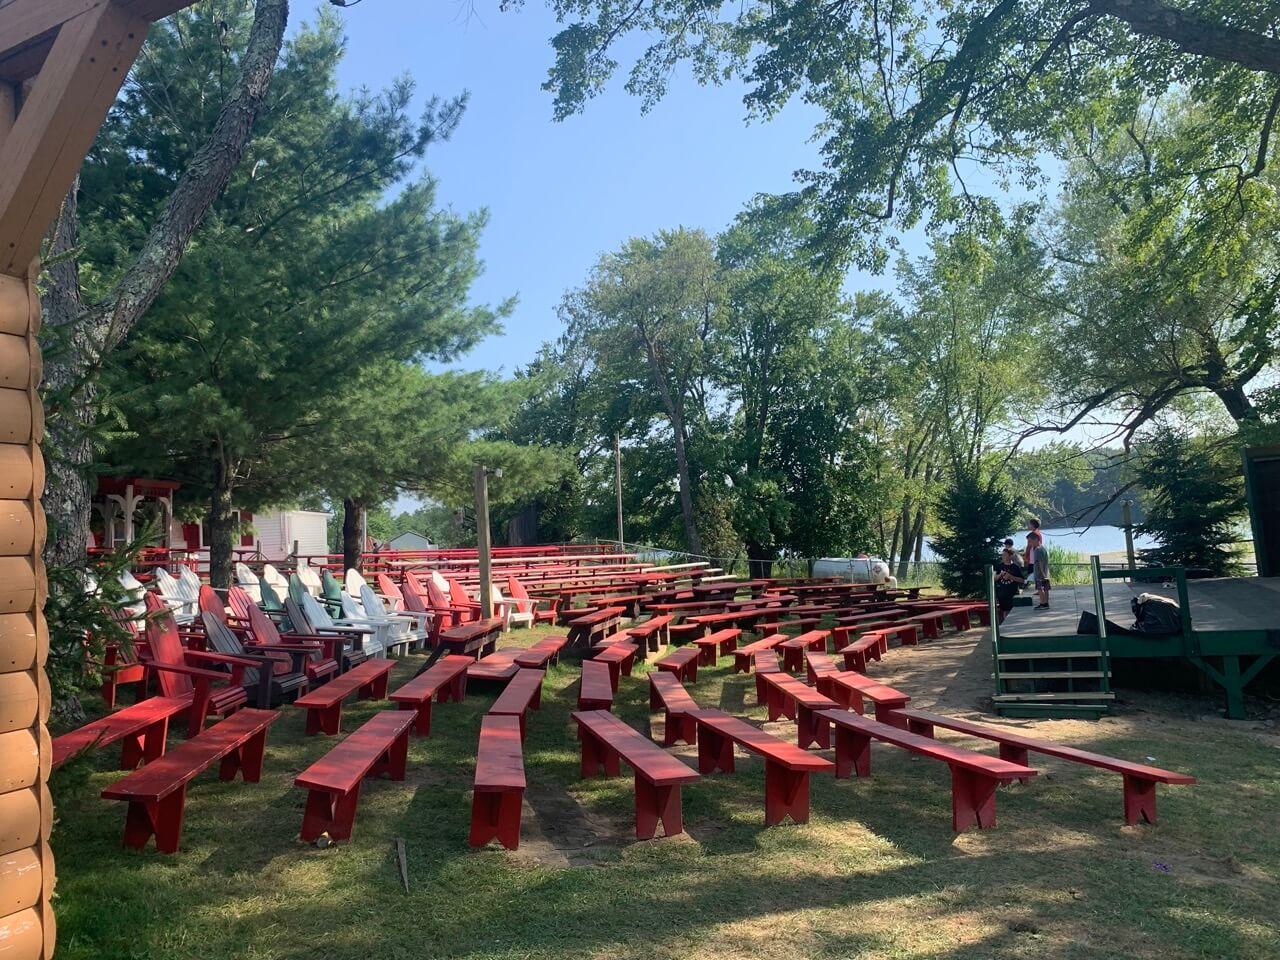 The Pines serves as a great venue on beautiful days and nights for outdoor shows, dances, sings, group games and meeting area.